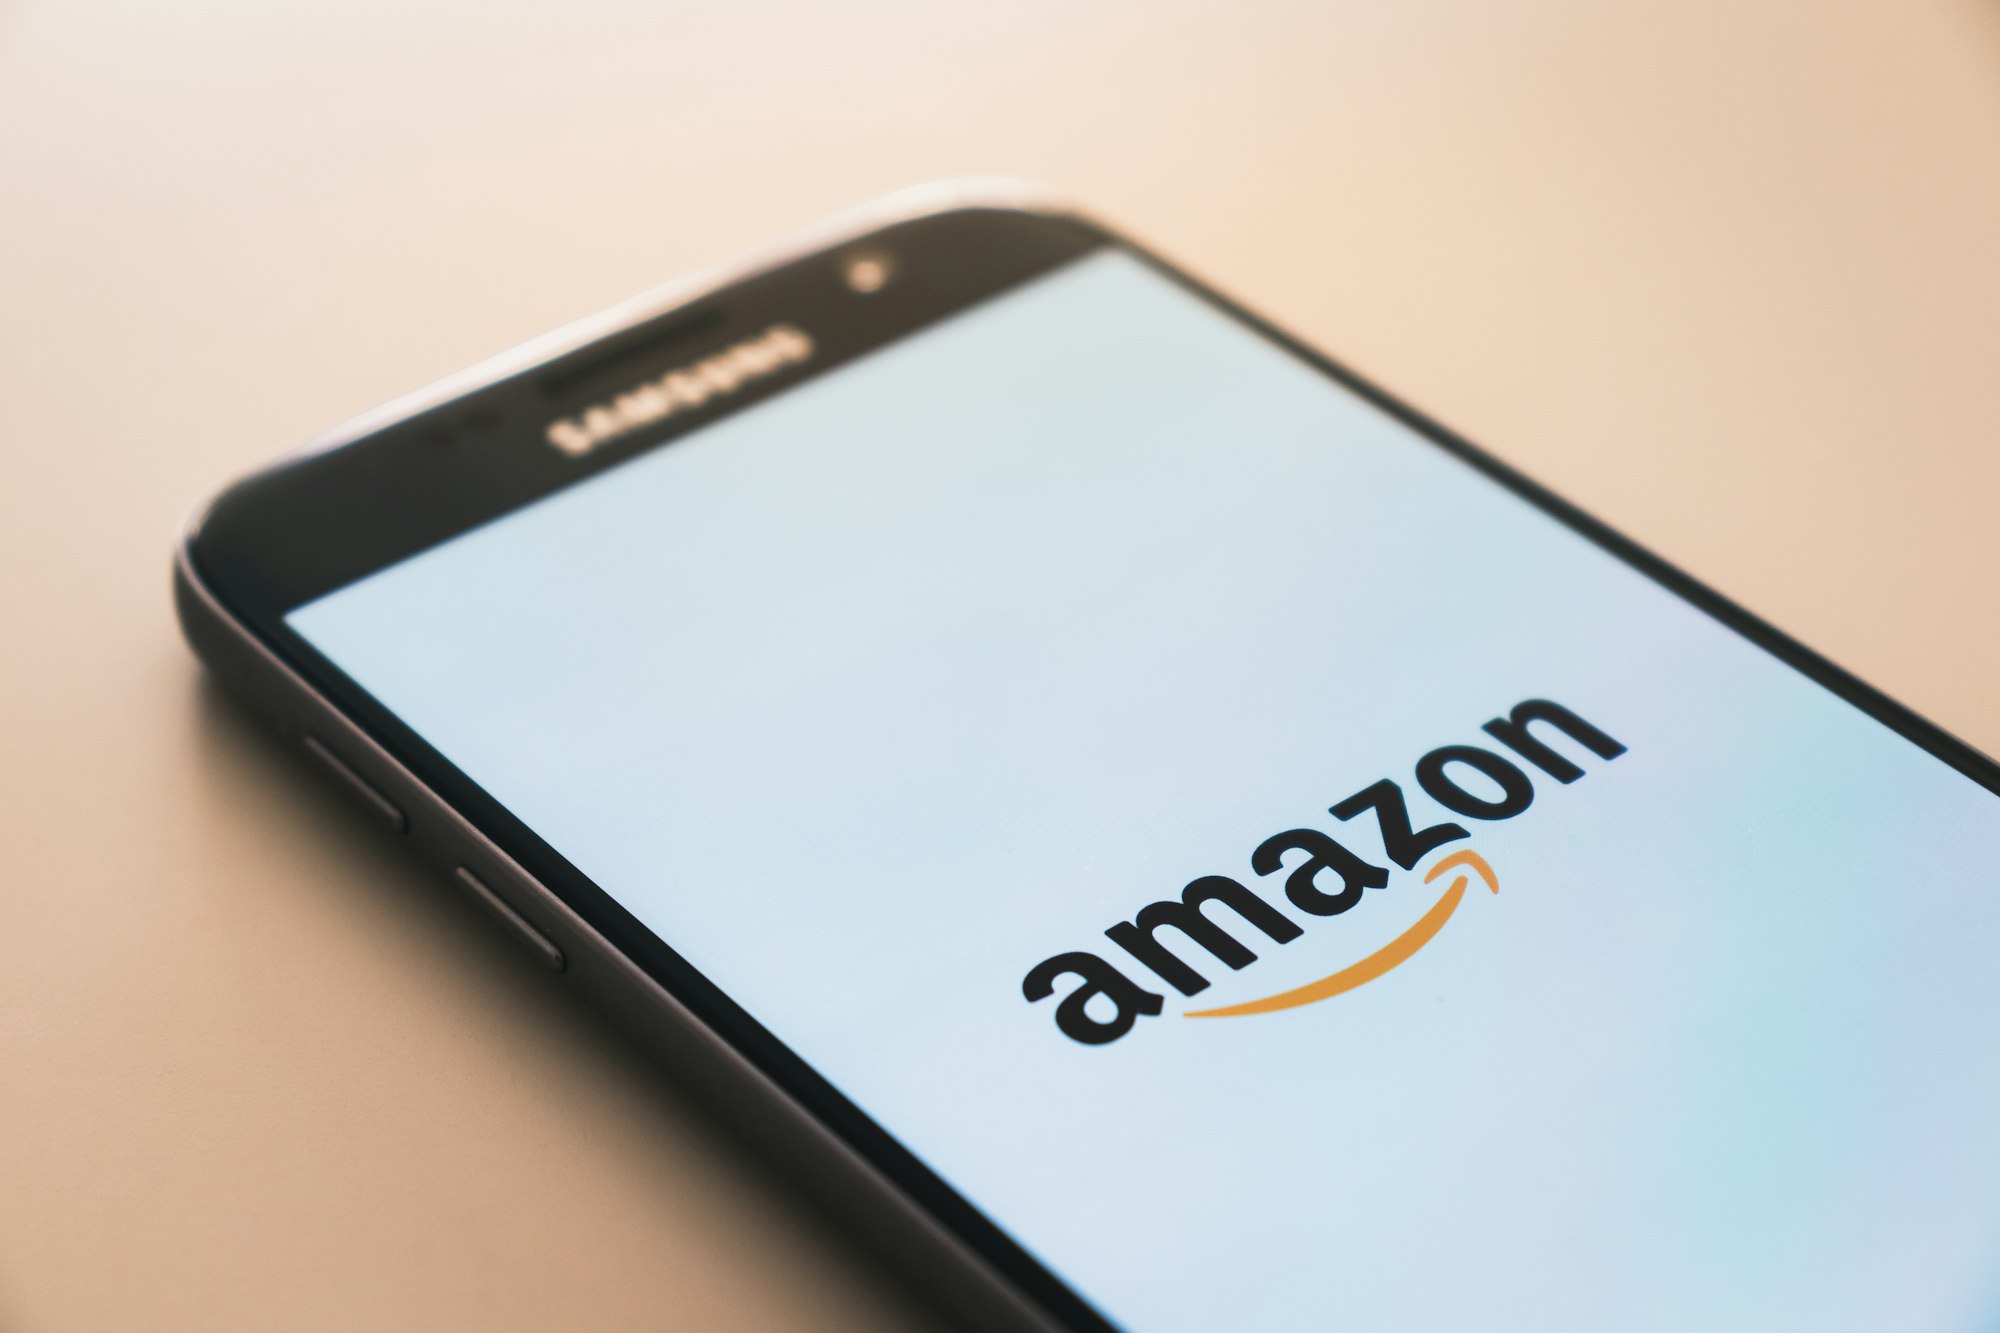 Amazon Hiring Process: Interview Questions, Salary, and Preparation Tips